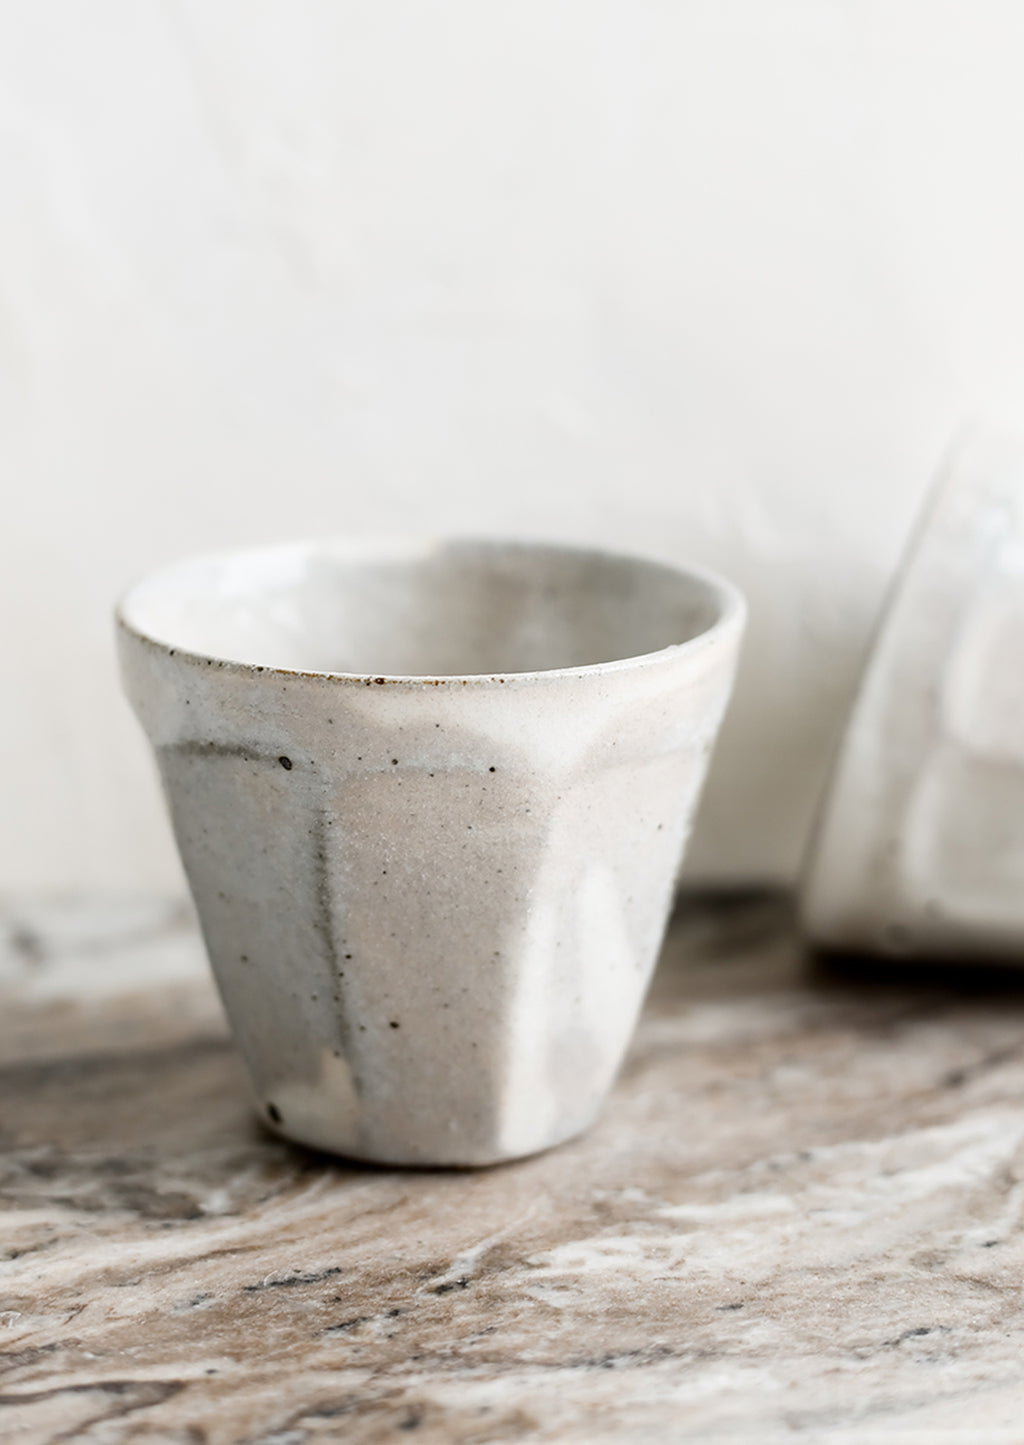 2: Small ceramic cups with faceted design.